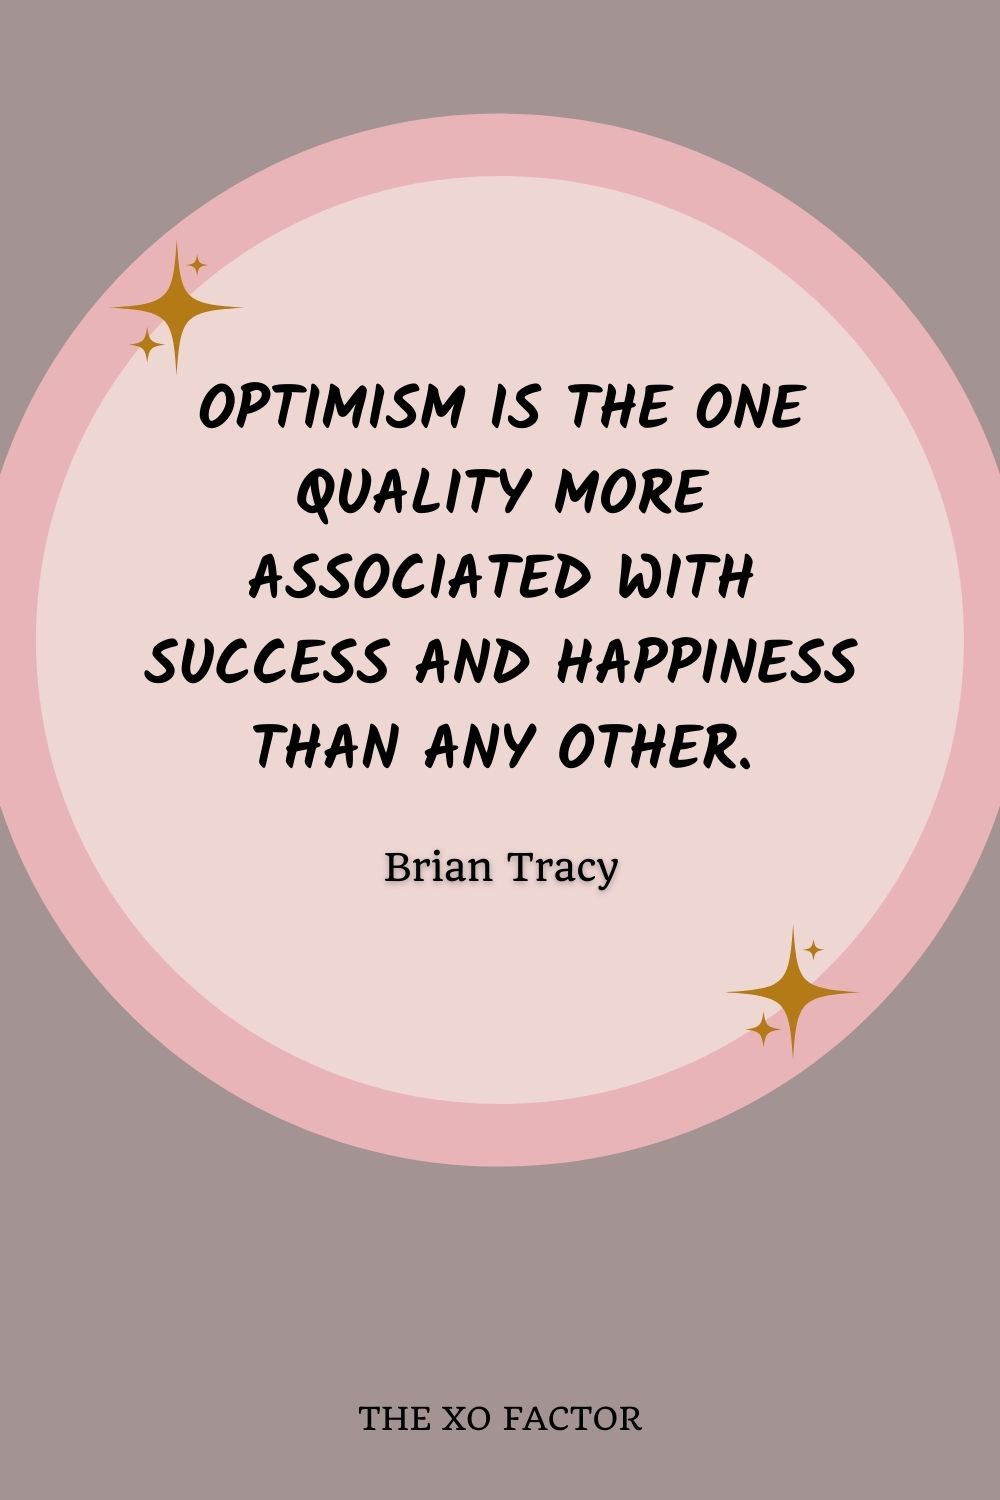 Optimism is the one quality more associated with success and happiness than any other.”- Brian Tracy